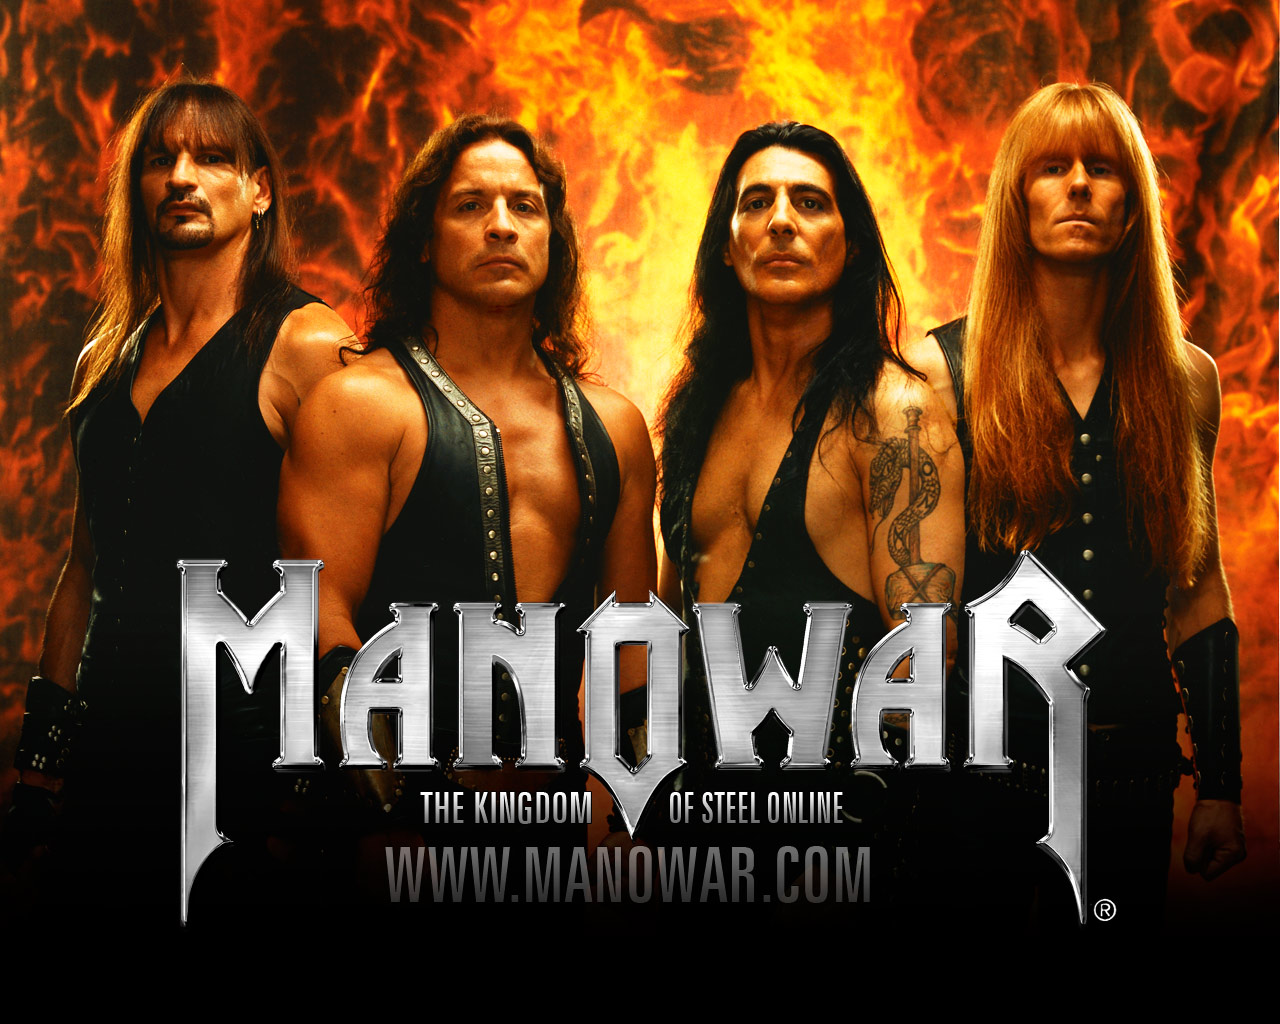 Manowar Image HD Wallpaper And Background Photos